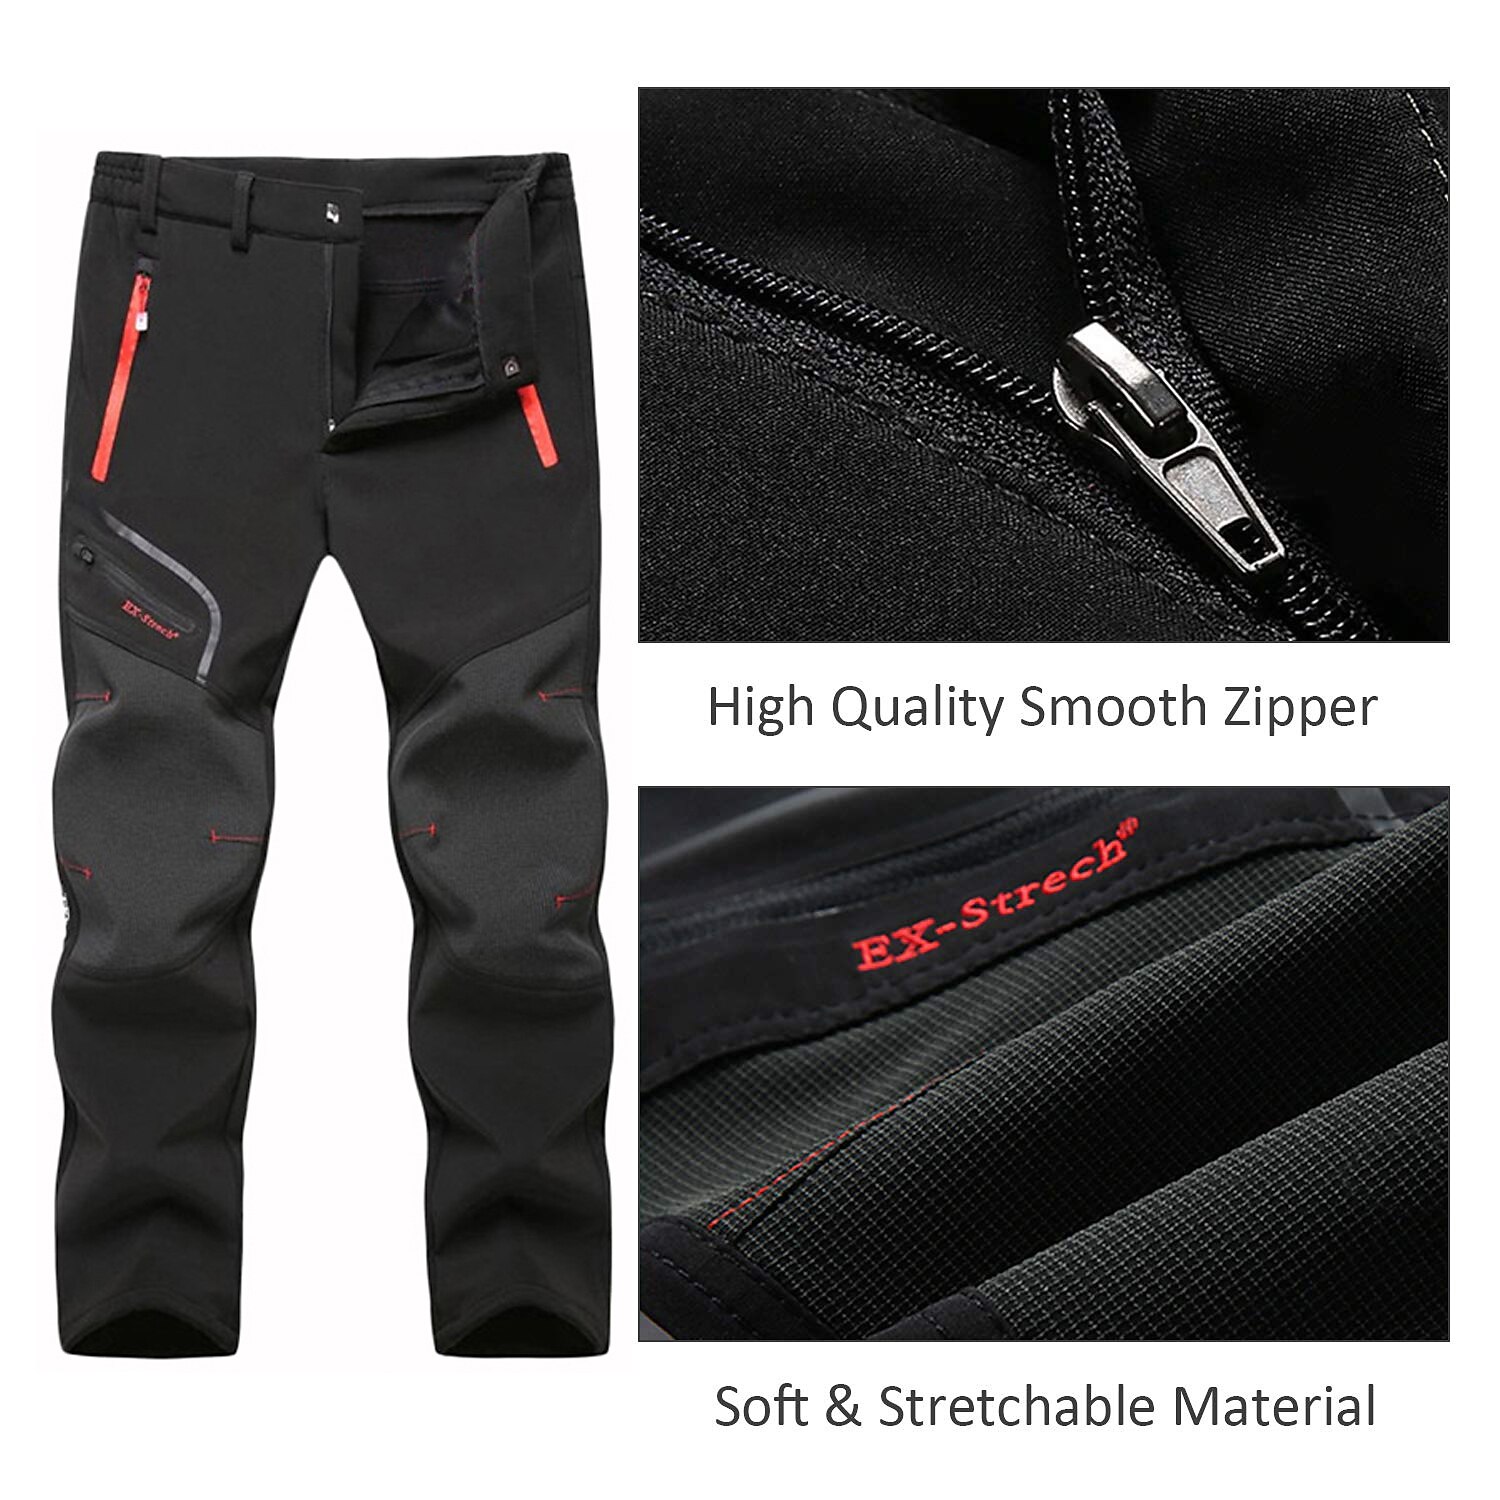 Men's AeroReflective | Thermal WindStopper Pants | Softshell Material for  Cold Weather